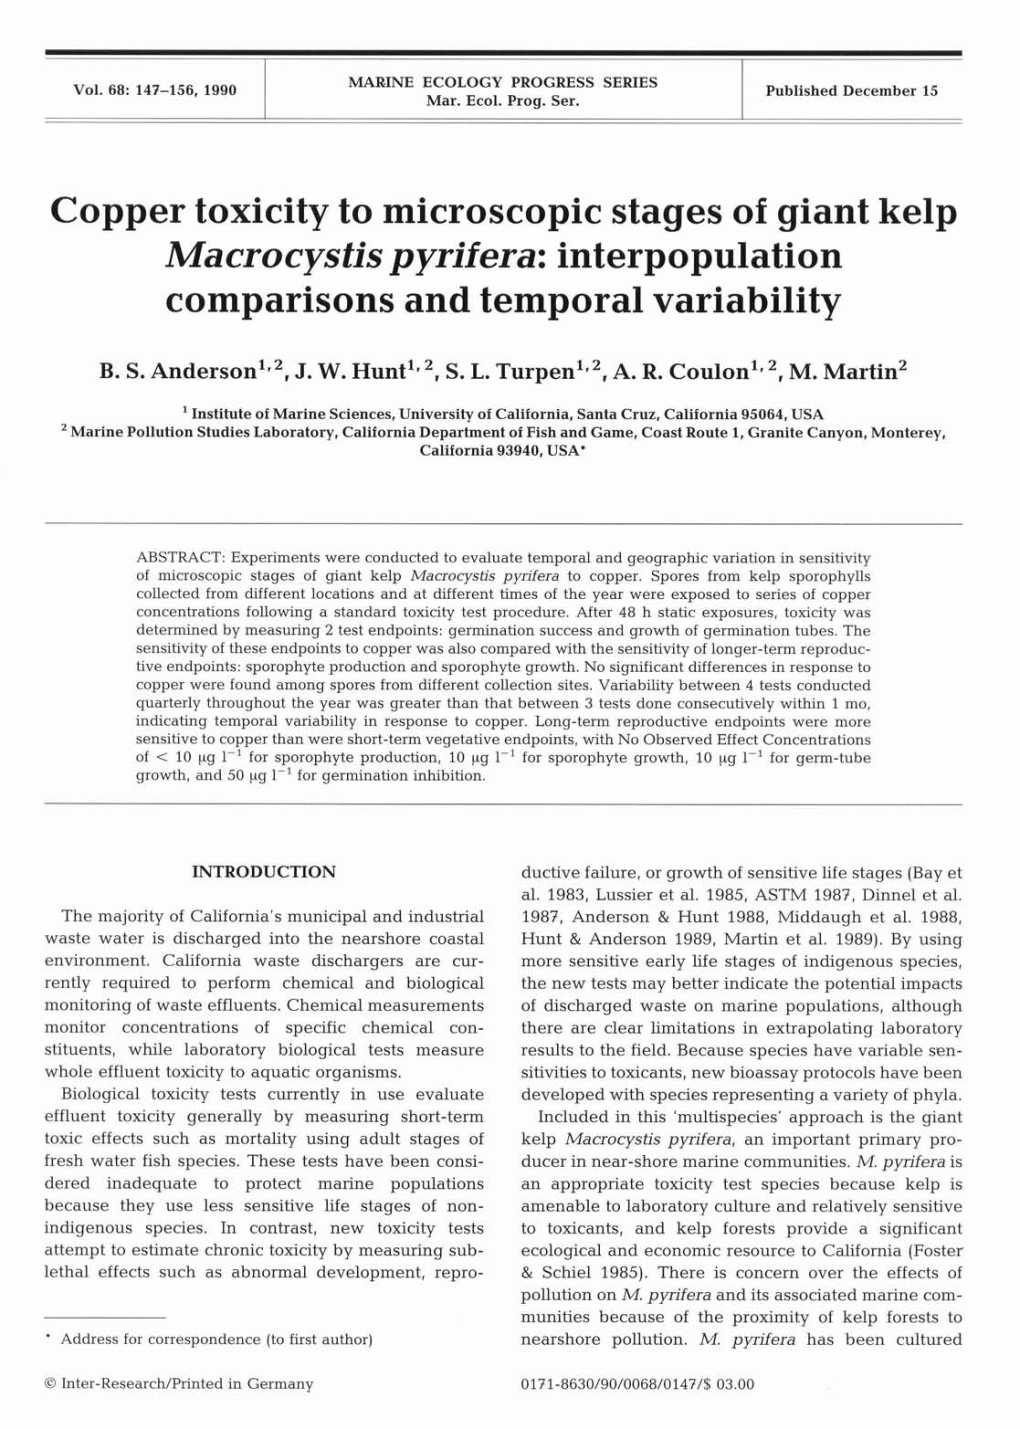 Macrocystis Pyrifera: Interpopulation Comparisons and Temporal Variability